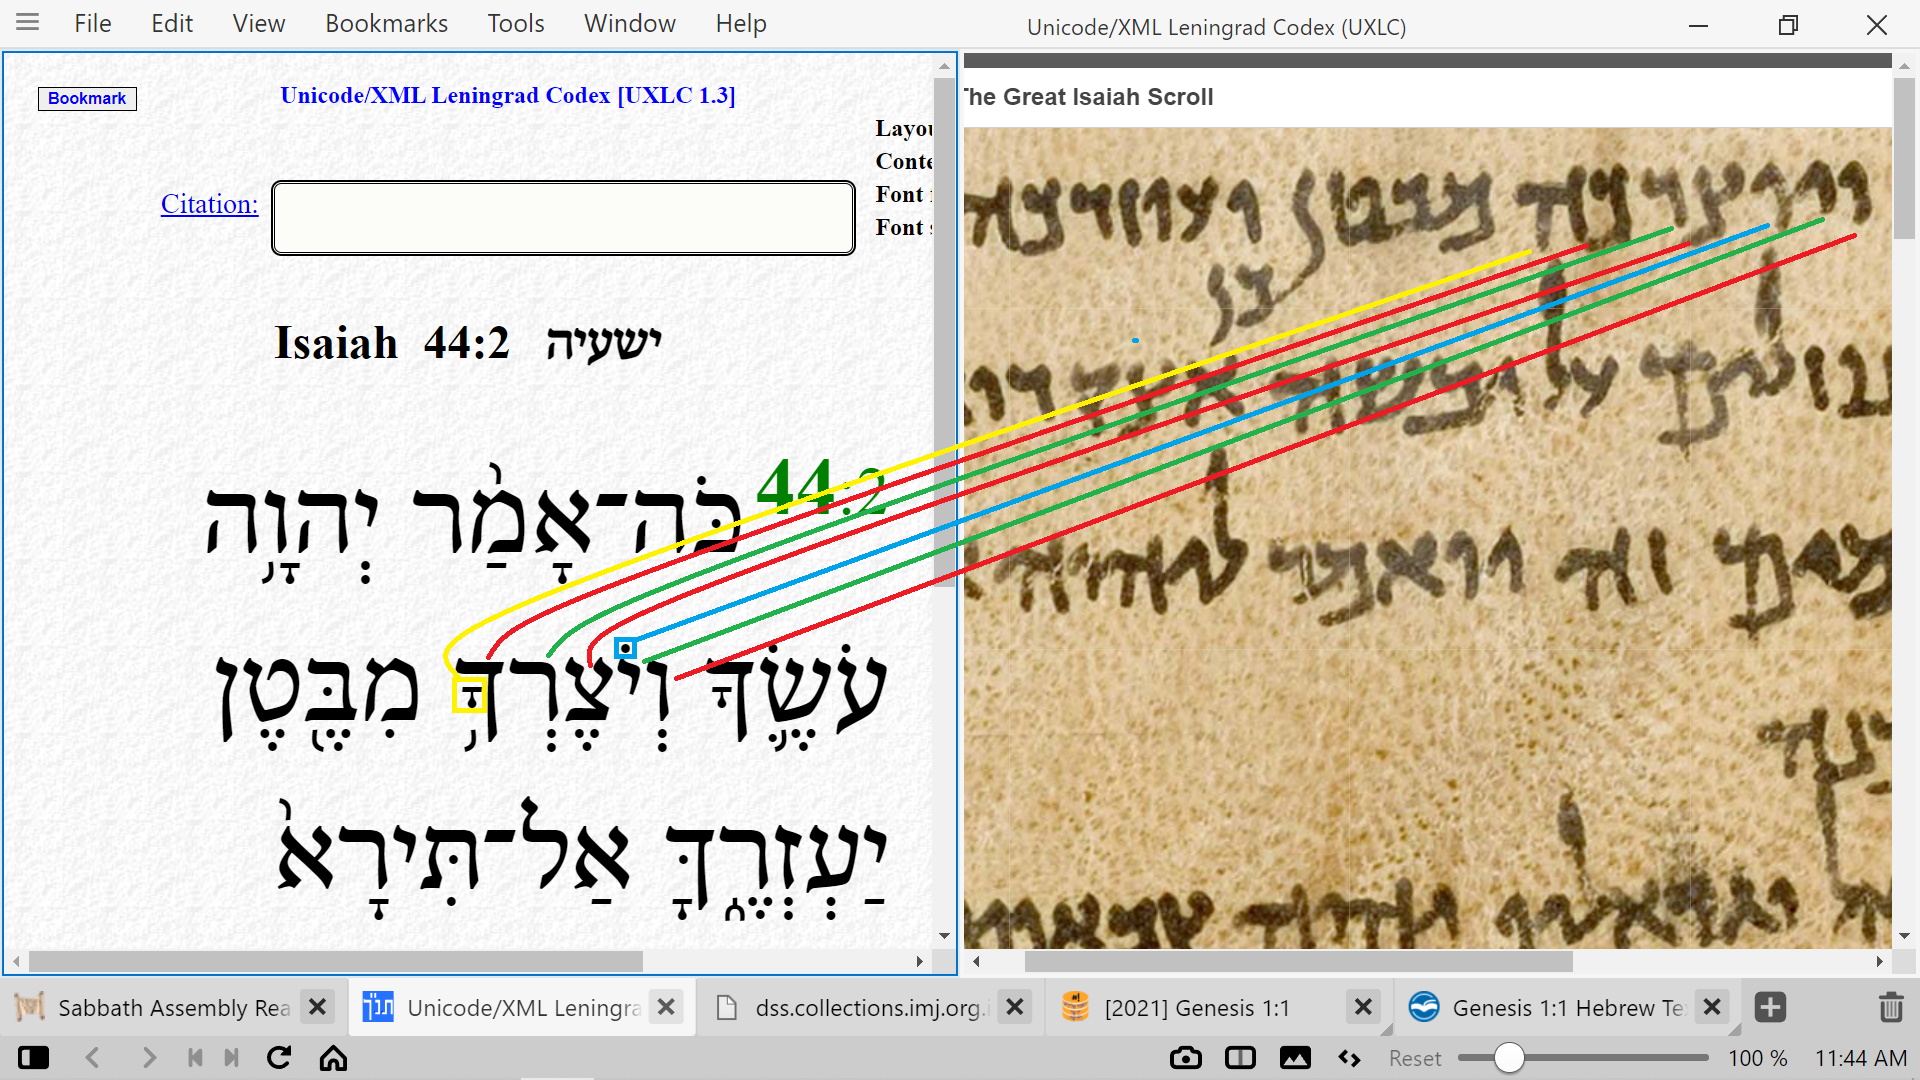 Isaiah 44 verse 2 in the Dead Sea Scrolls compared to the Masoretic Hebrew - Pic 3